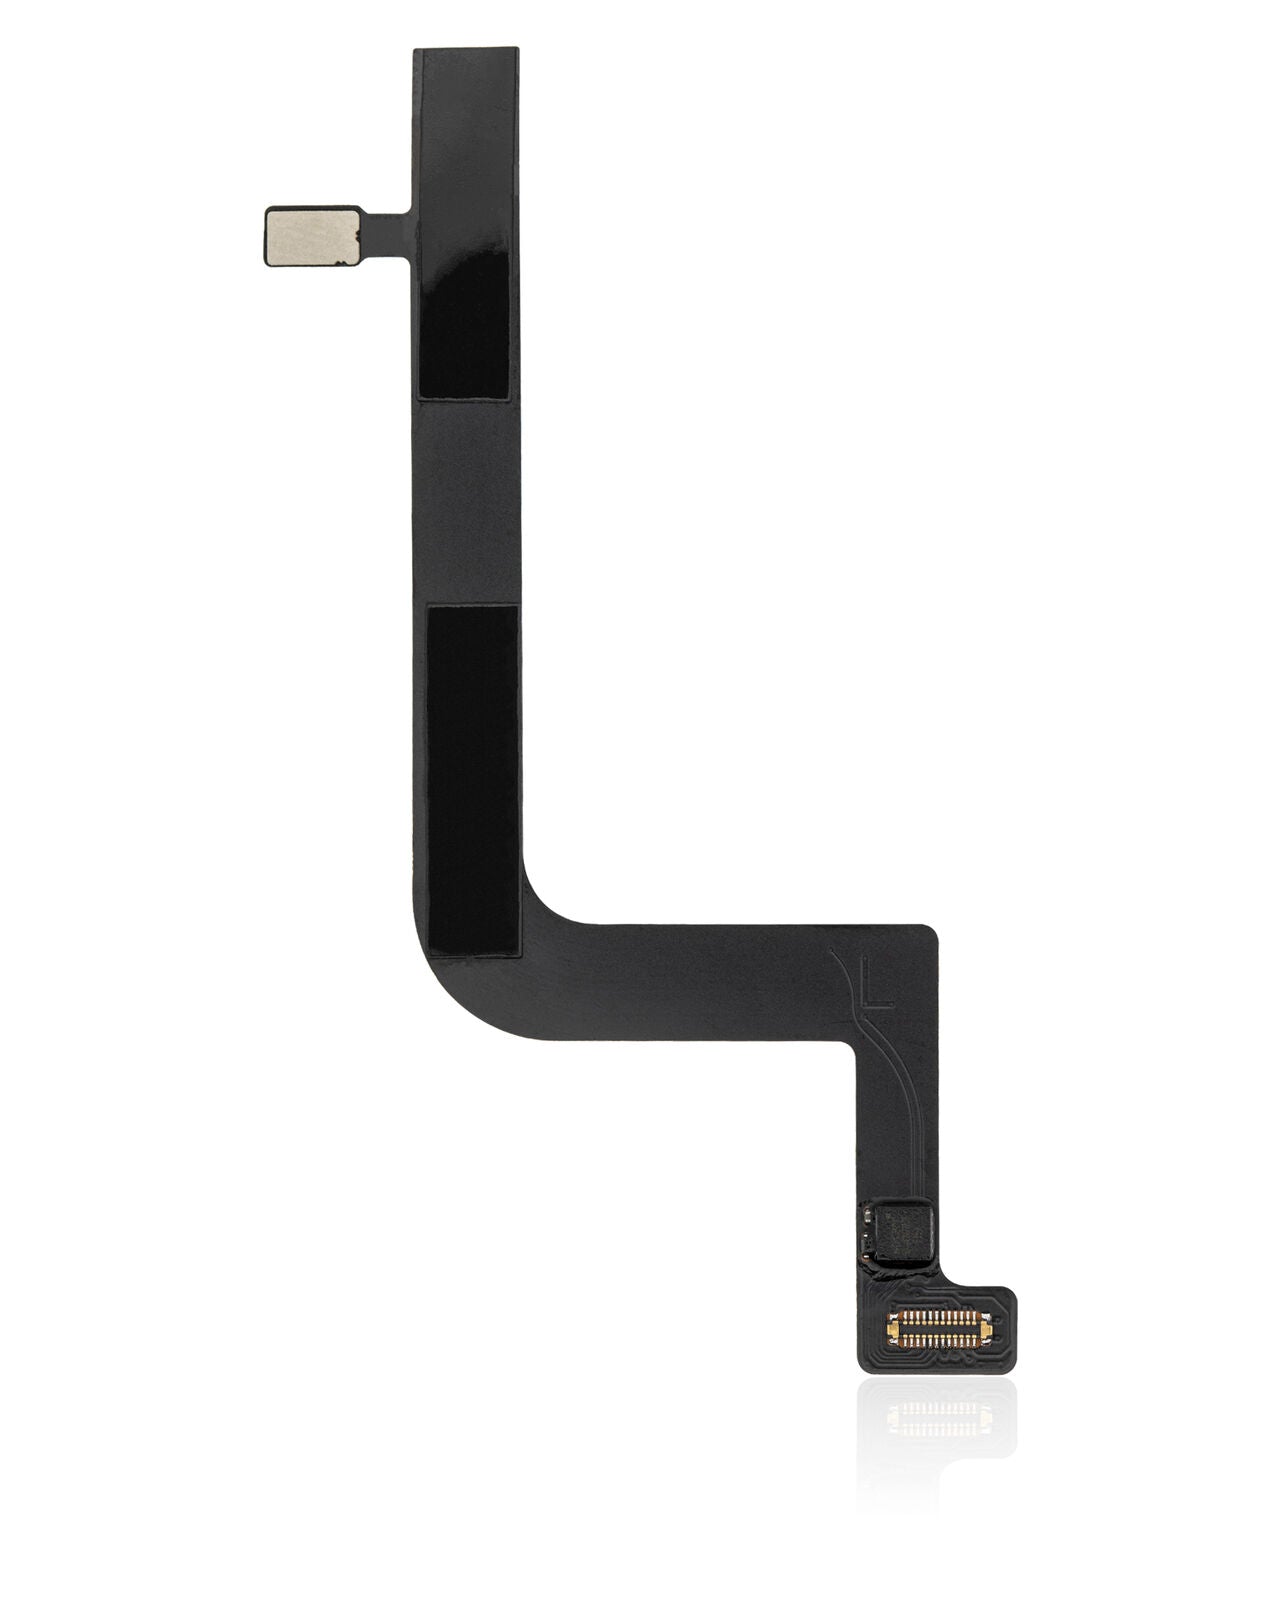 For iPhone 8 / SE (2020) Home Button Restoration Flex Cable Replacement (No Touch ID Functionality)